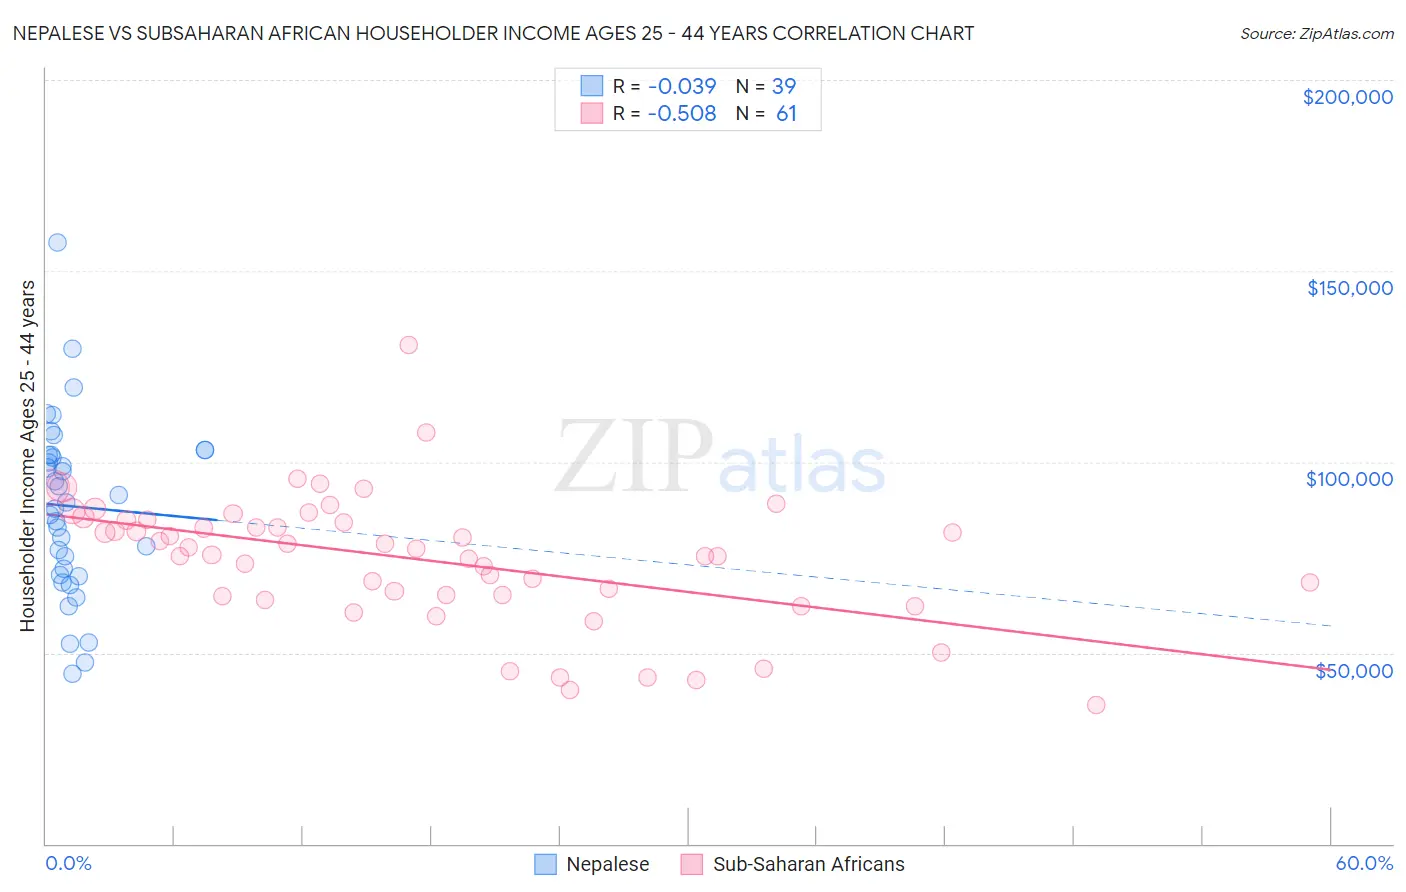 Nepalese vs Subsaharan African Householder Income Ages 25 - 44 years